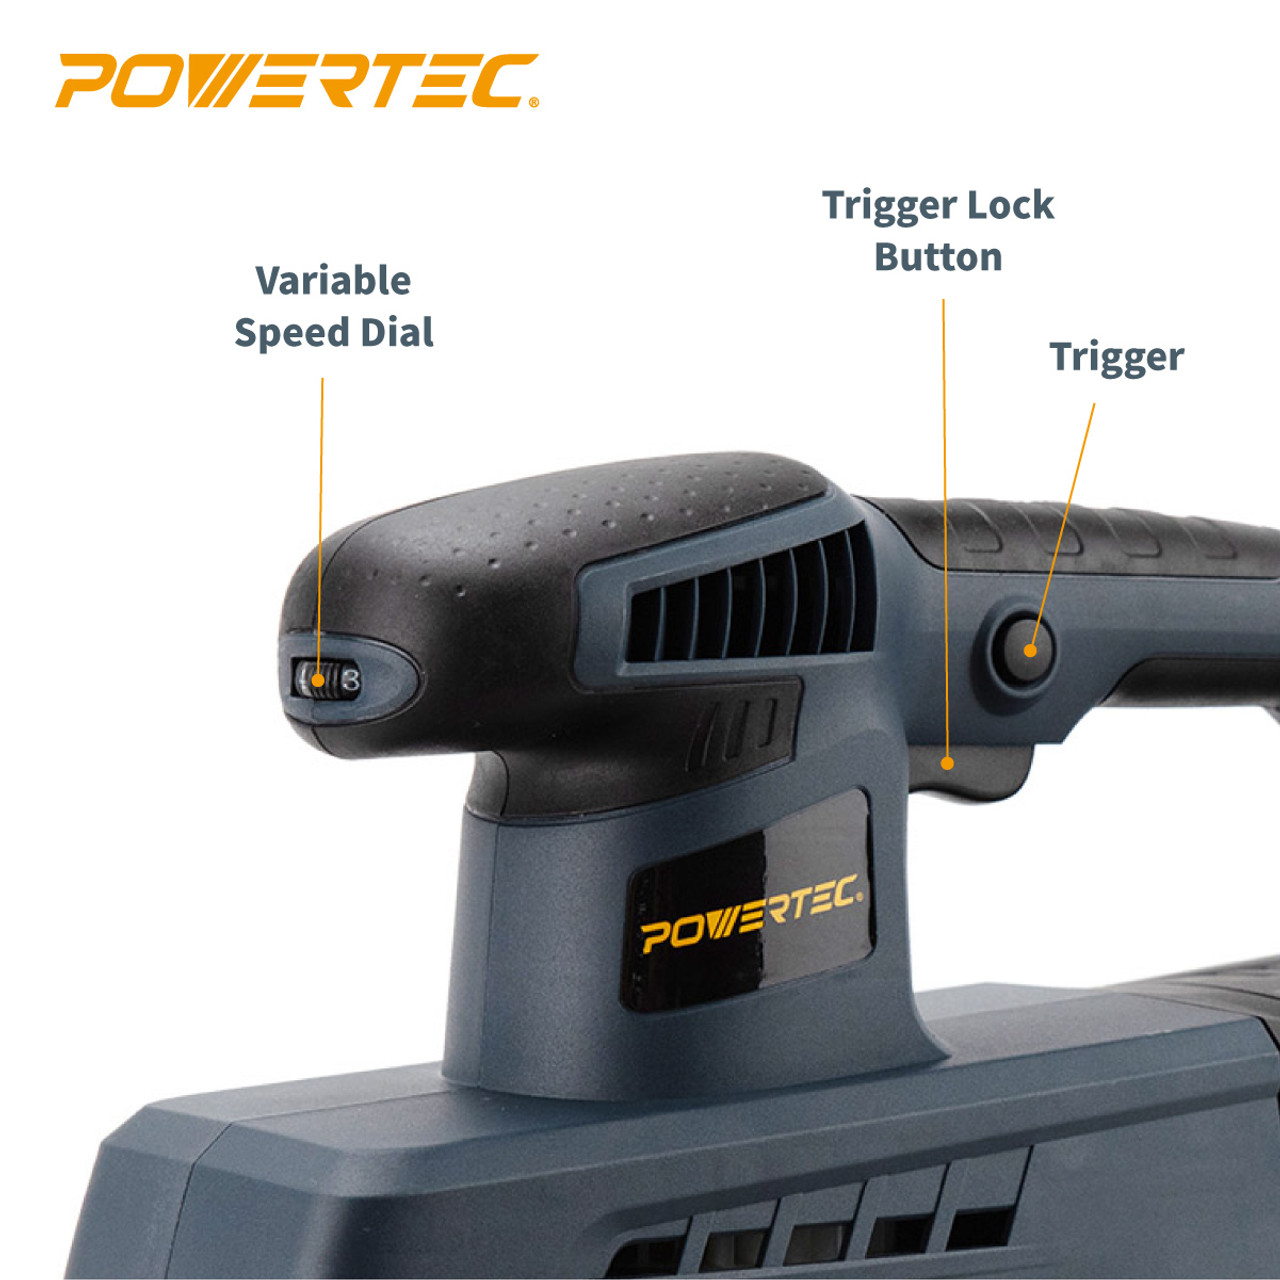 1/2 Sheet Variable Orbital Sander with Hole Punch Set by POWERTEC.